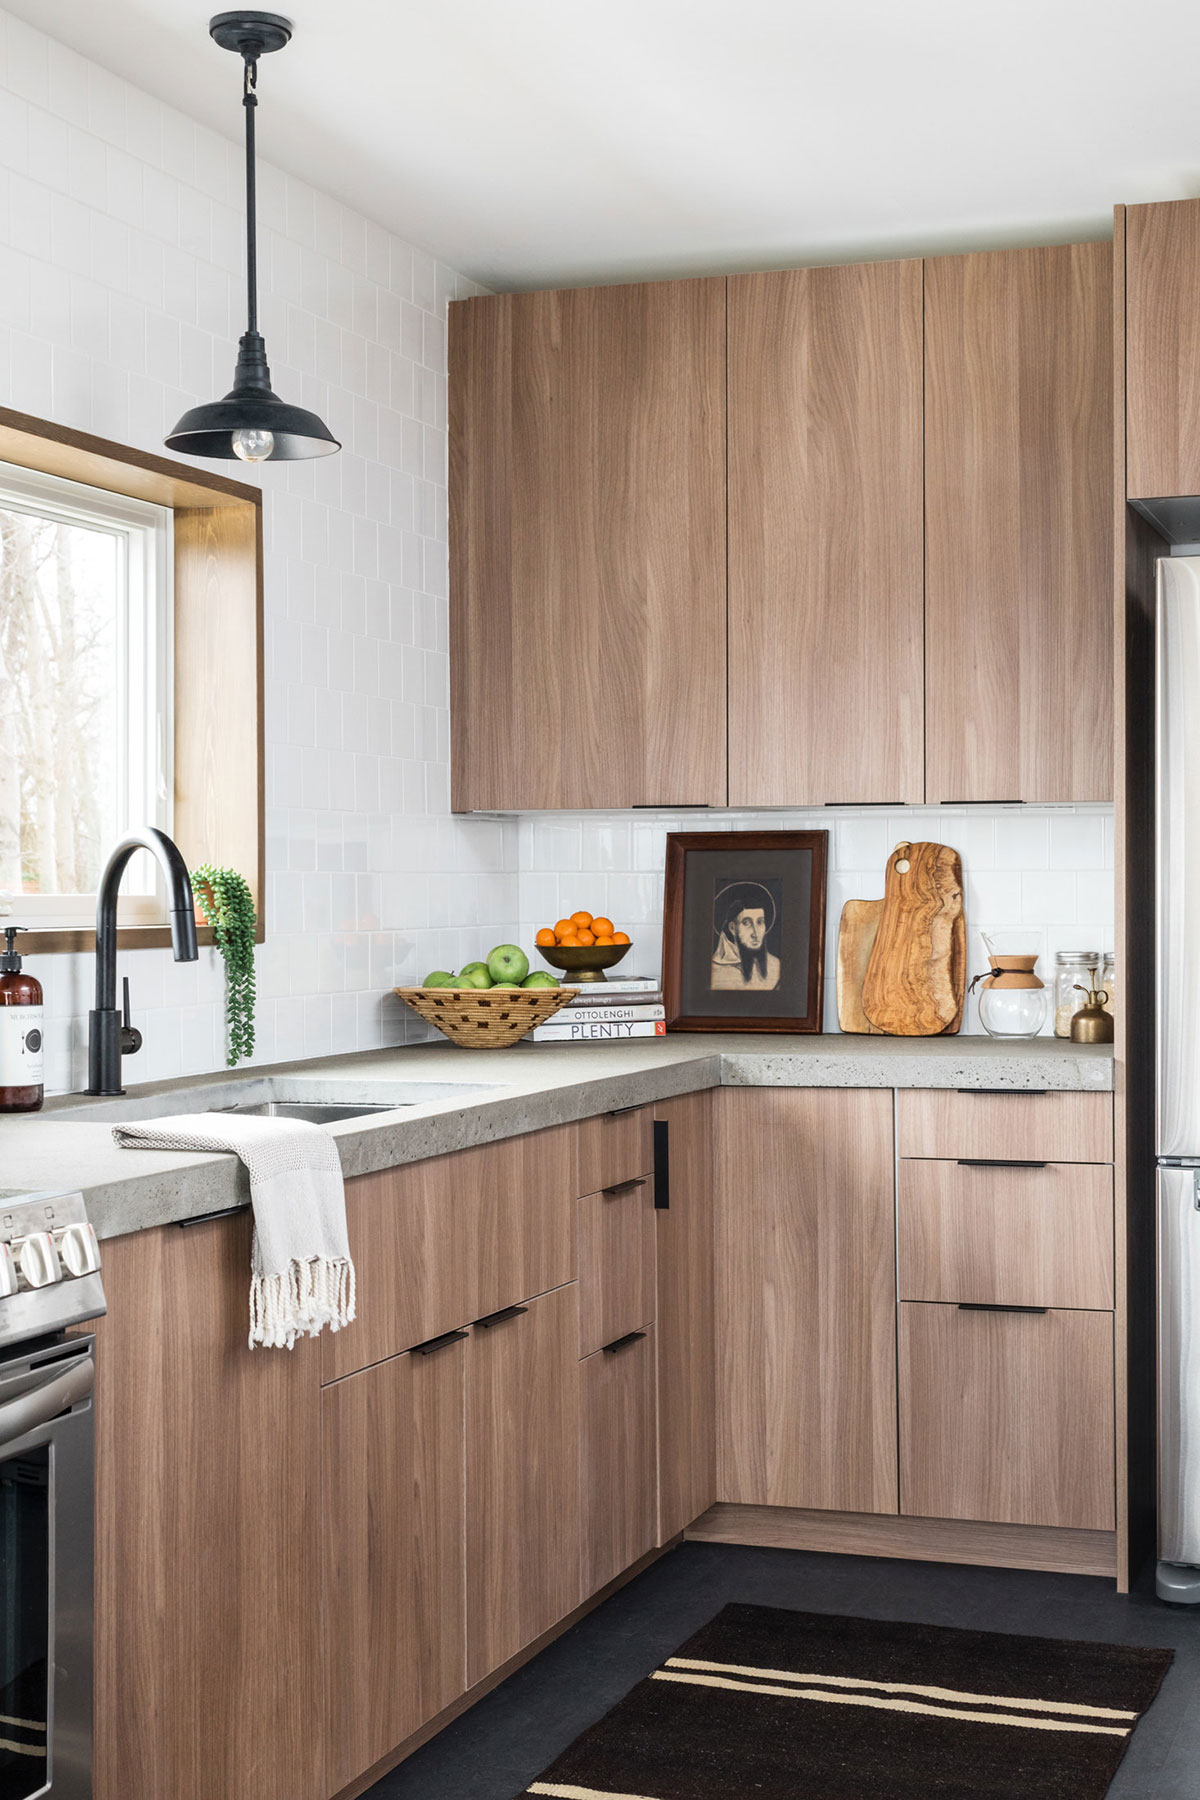  are ikea kitchen cabinets good quality